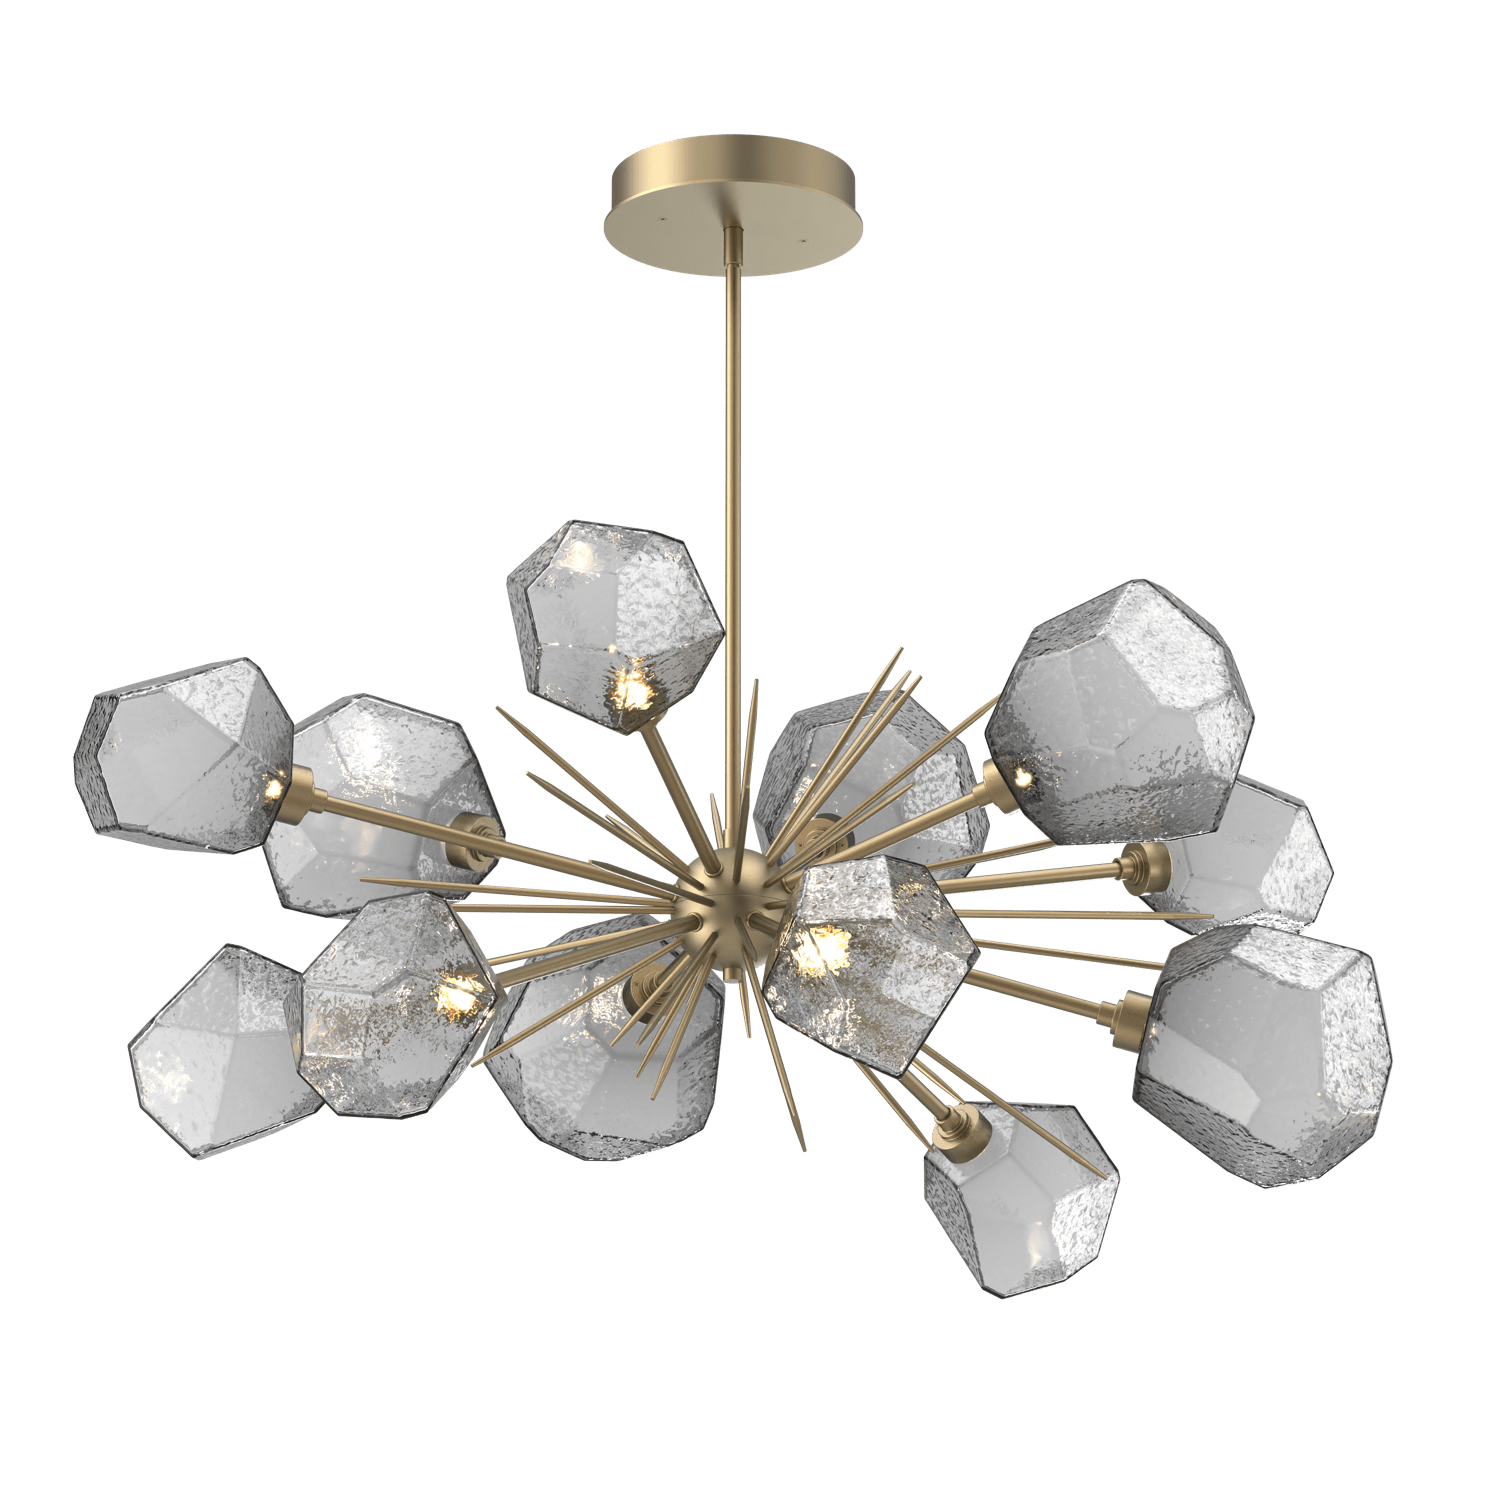 PLB0039-0D-GB-S-Hammerton-Studio-Gem-43-inch-oval-starburst-chandelier-with-gilded-brass-finish-and-smoke-blown-glass-shades-and-LED-lamping